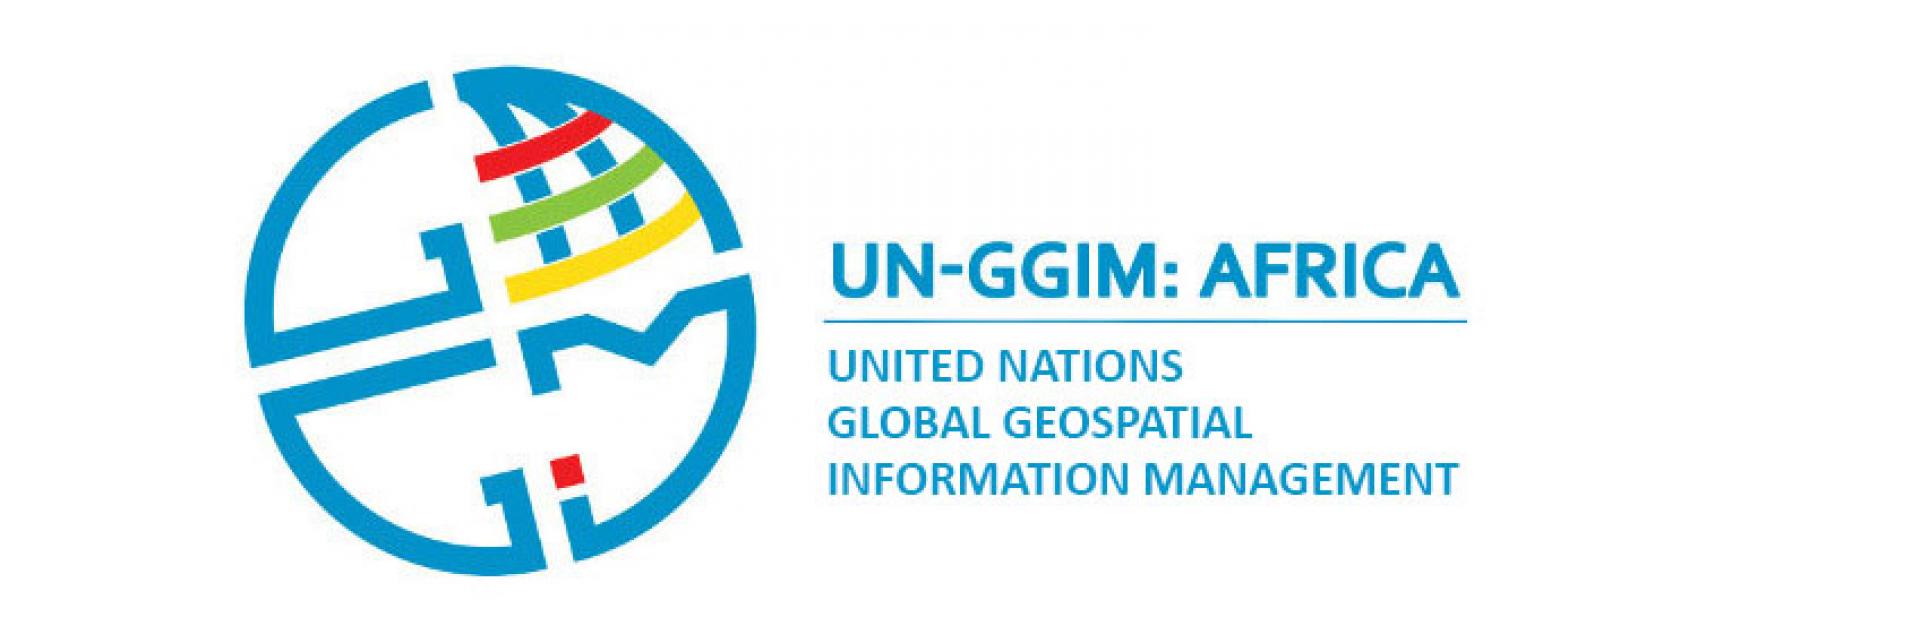 Eighth Session of the United Nations Global Geospatial Information Management for Africa (UN-GGIM: Africa) 